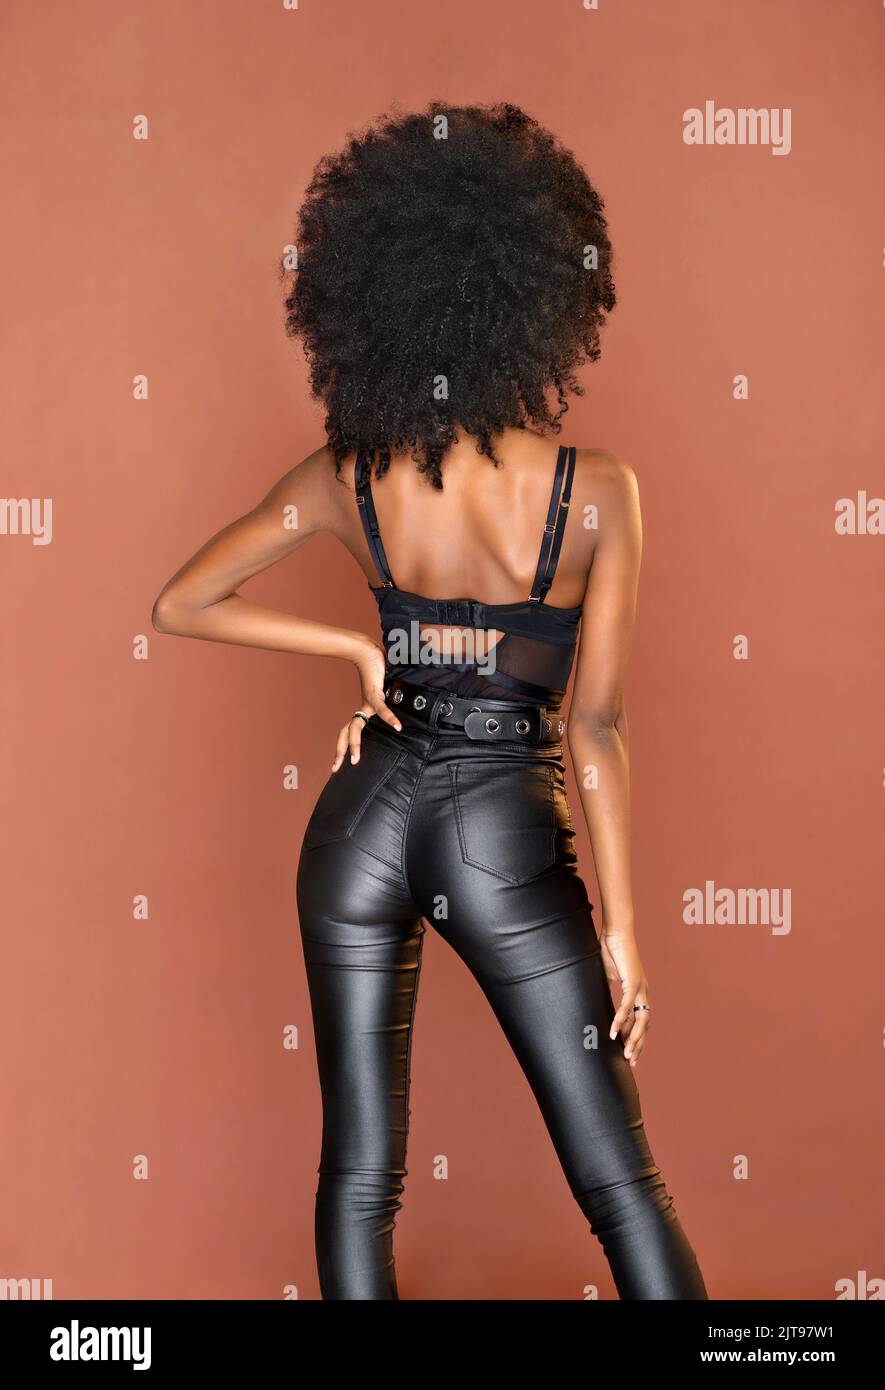 Back view of anonymous African American female model with Afro hairstyle in leather pants and top standing with hand on waist against brown background Stock Photo